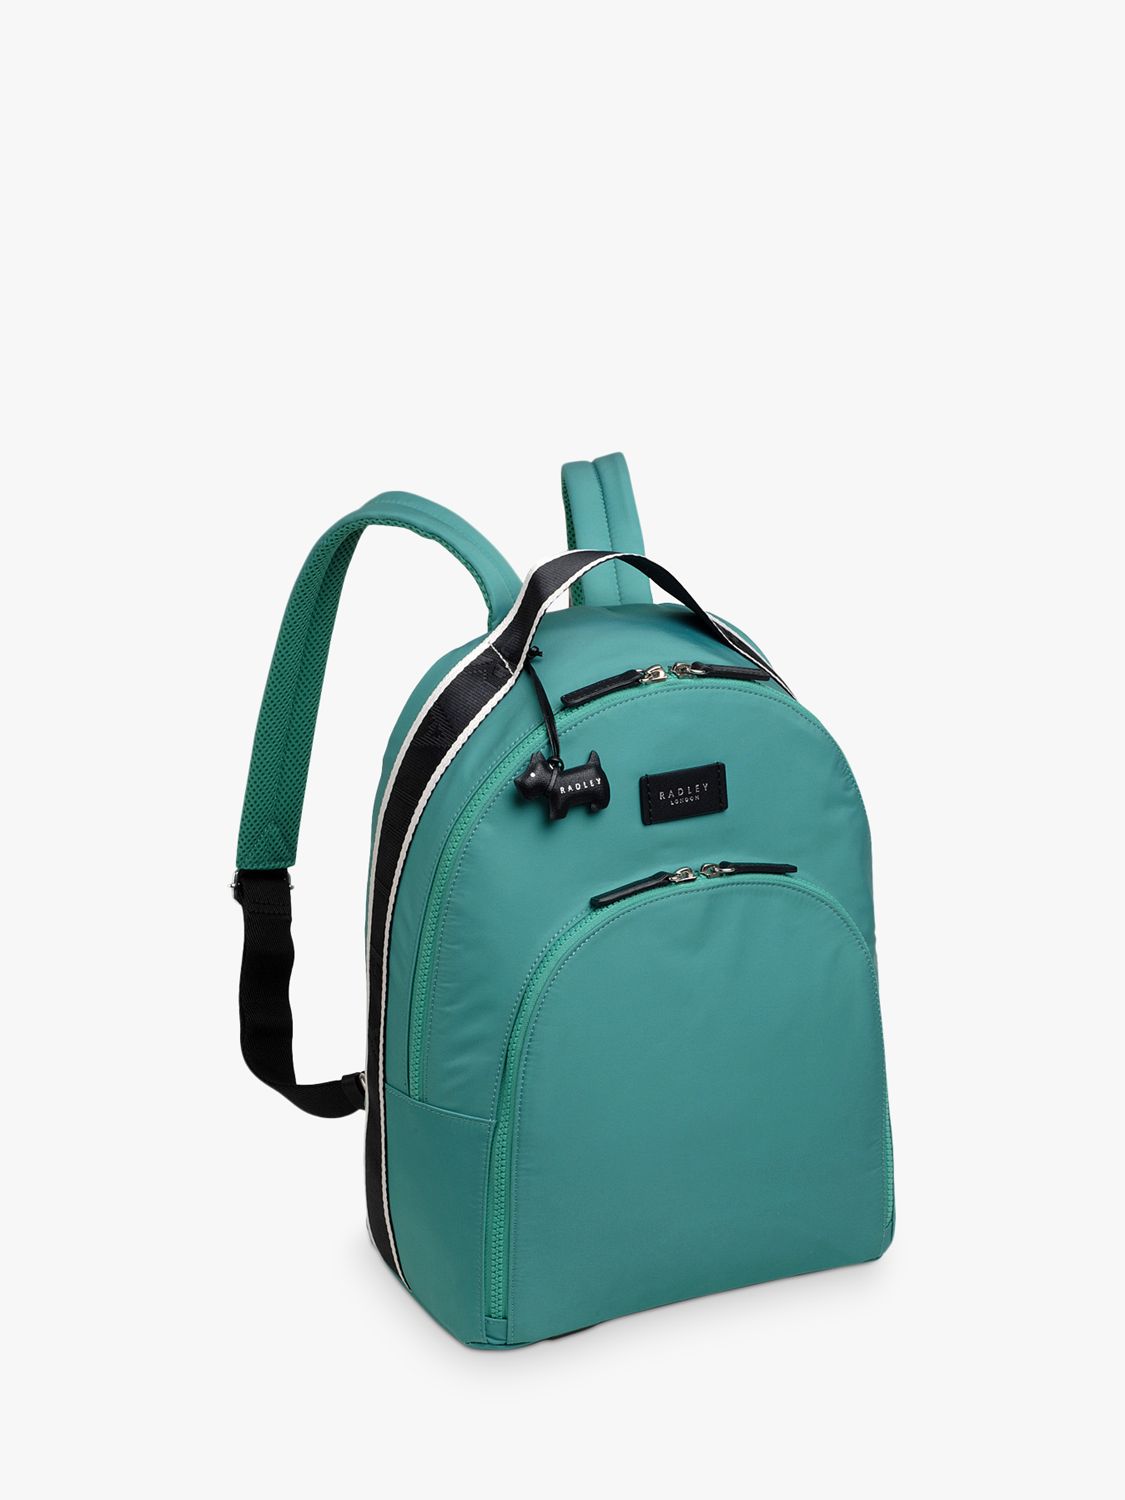 Radley Cable Street Backpack, Jungle